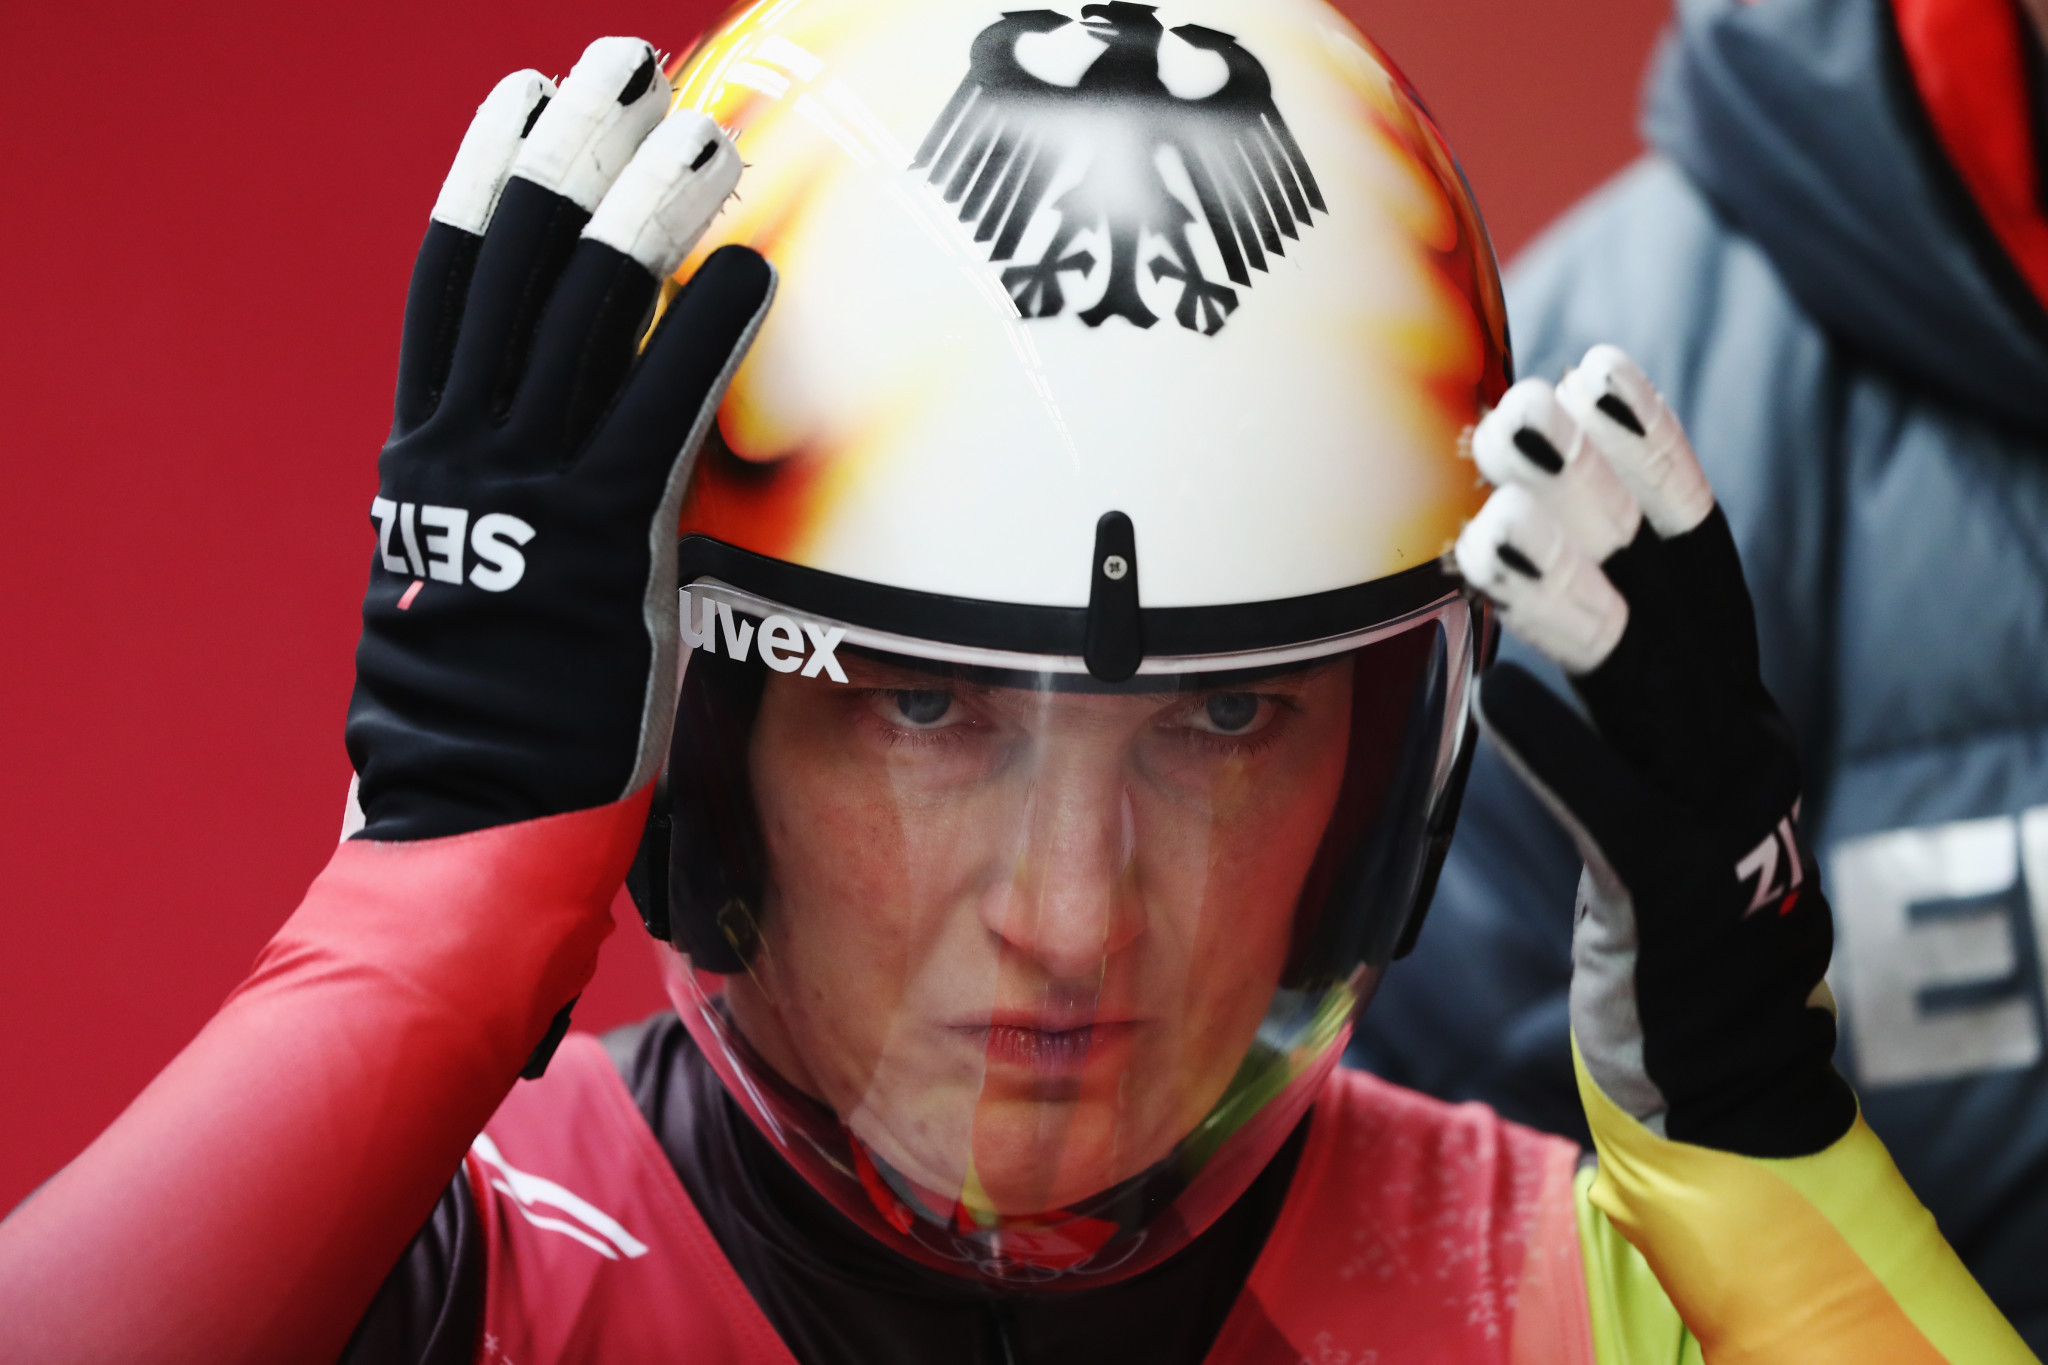 Olympic luge gold medallist Hüfner takes coaching role in Italy